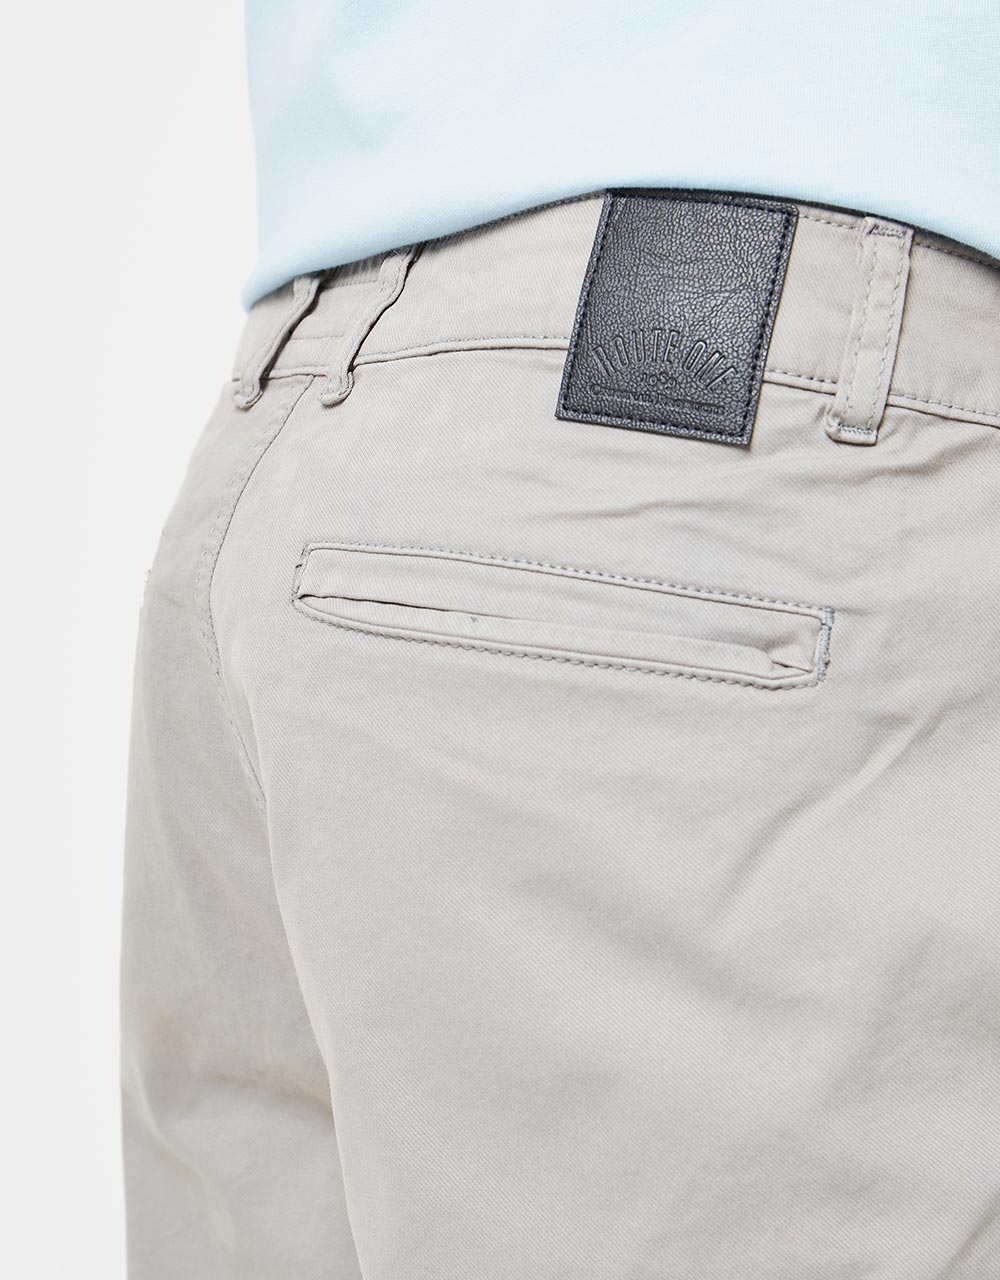 Route One Roll Up Chino Shorts - Grey